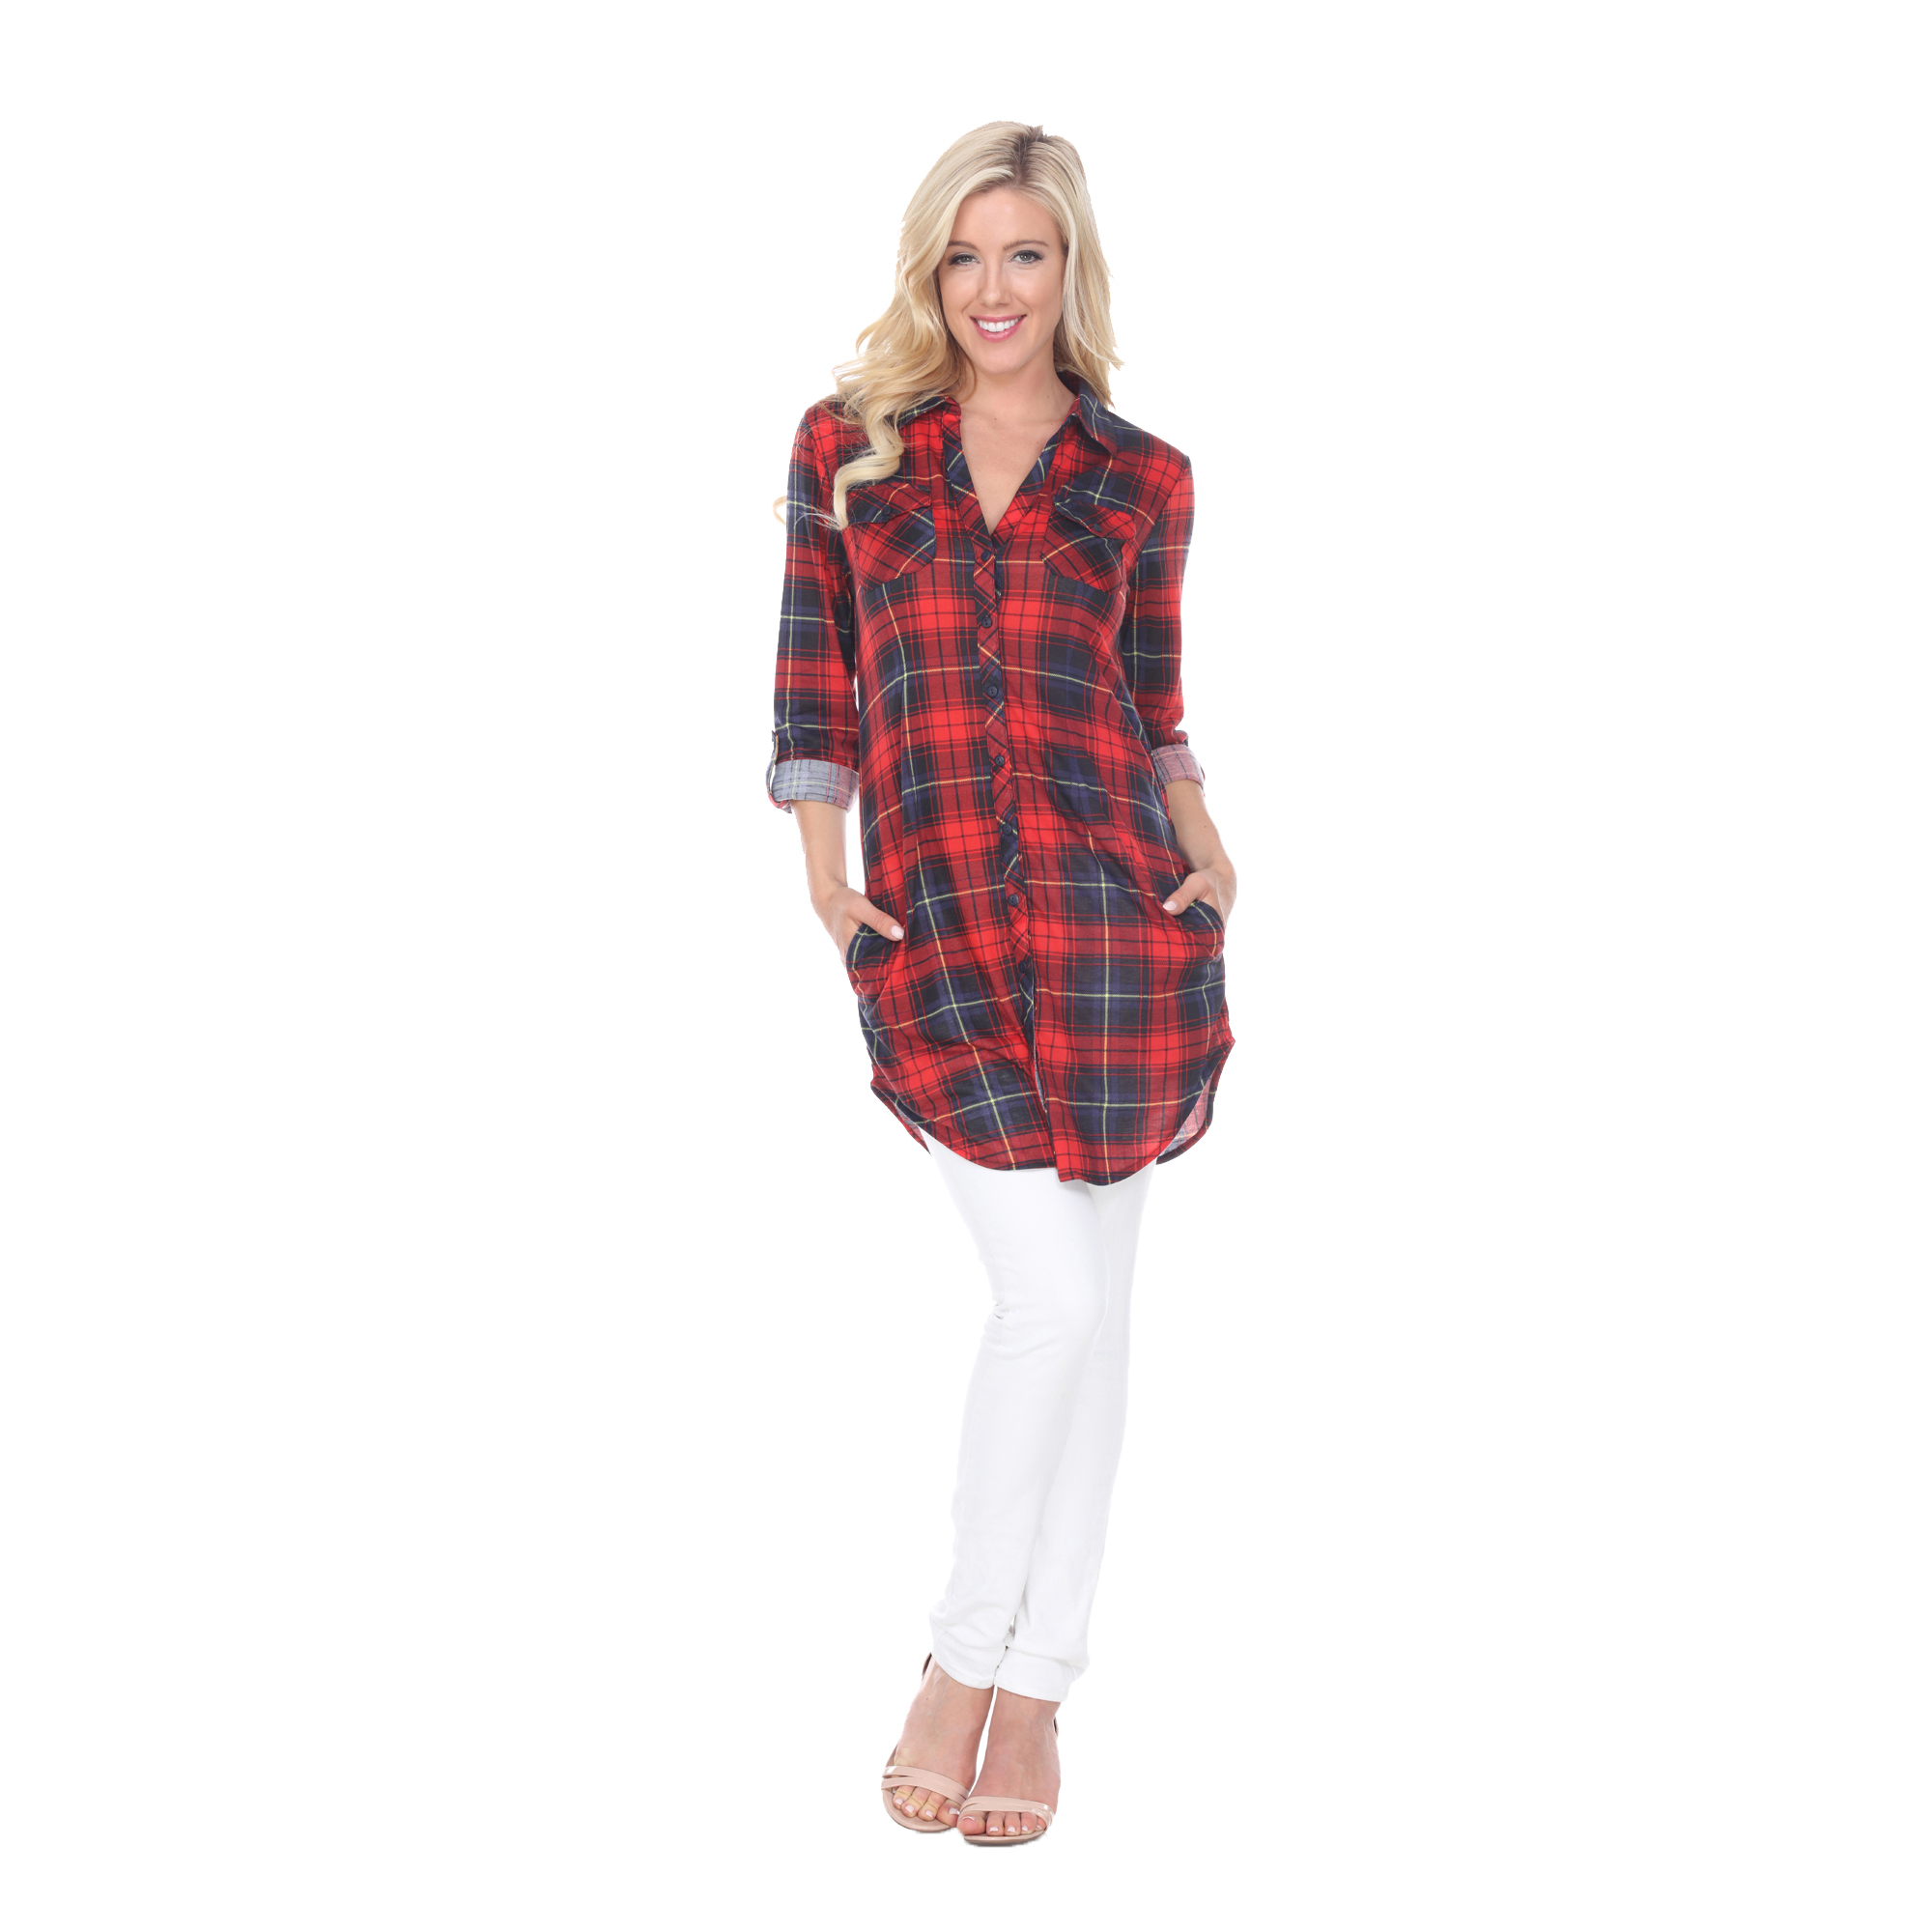 White Mark Women's Stretchy Plaid Flannel Tunic Top - Red/Black, Medium